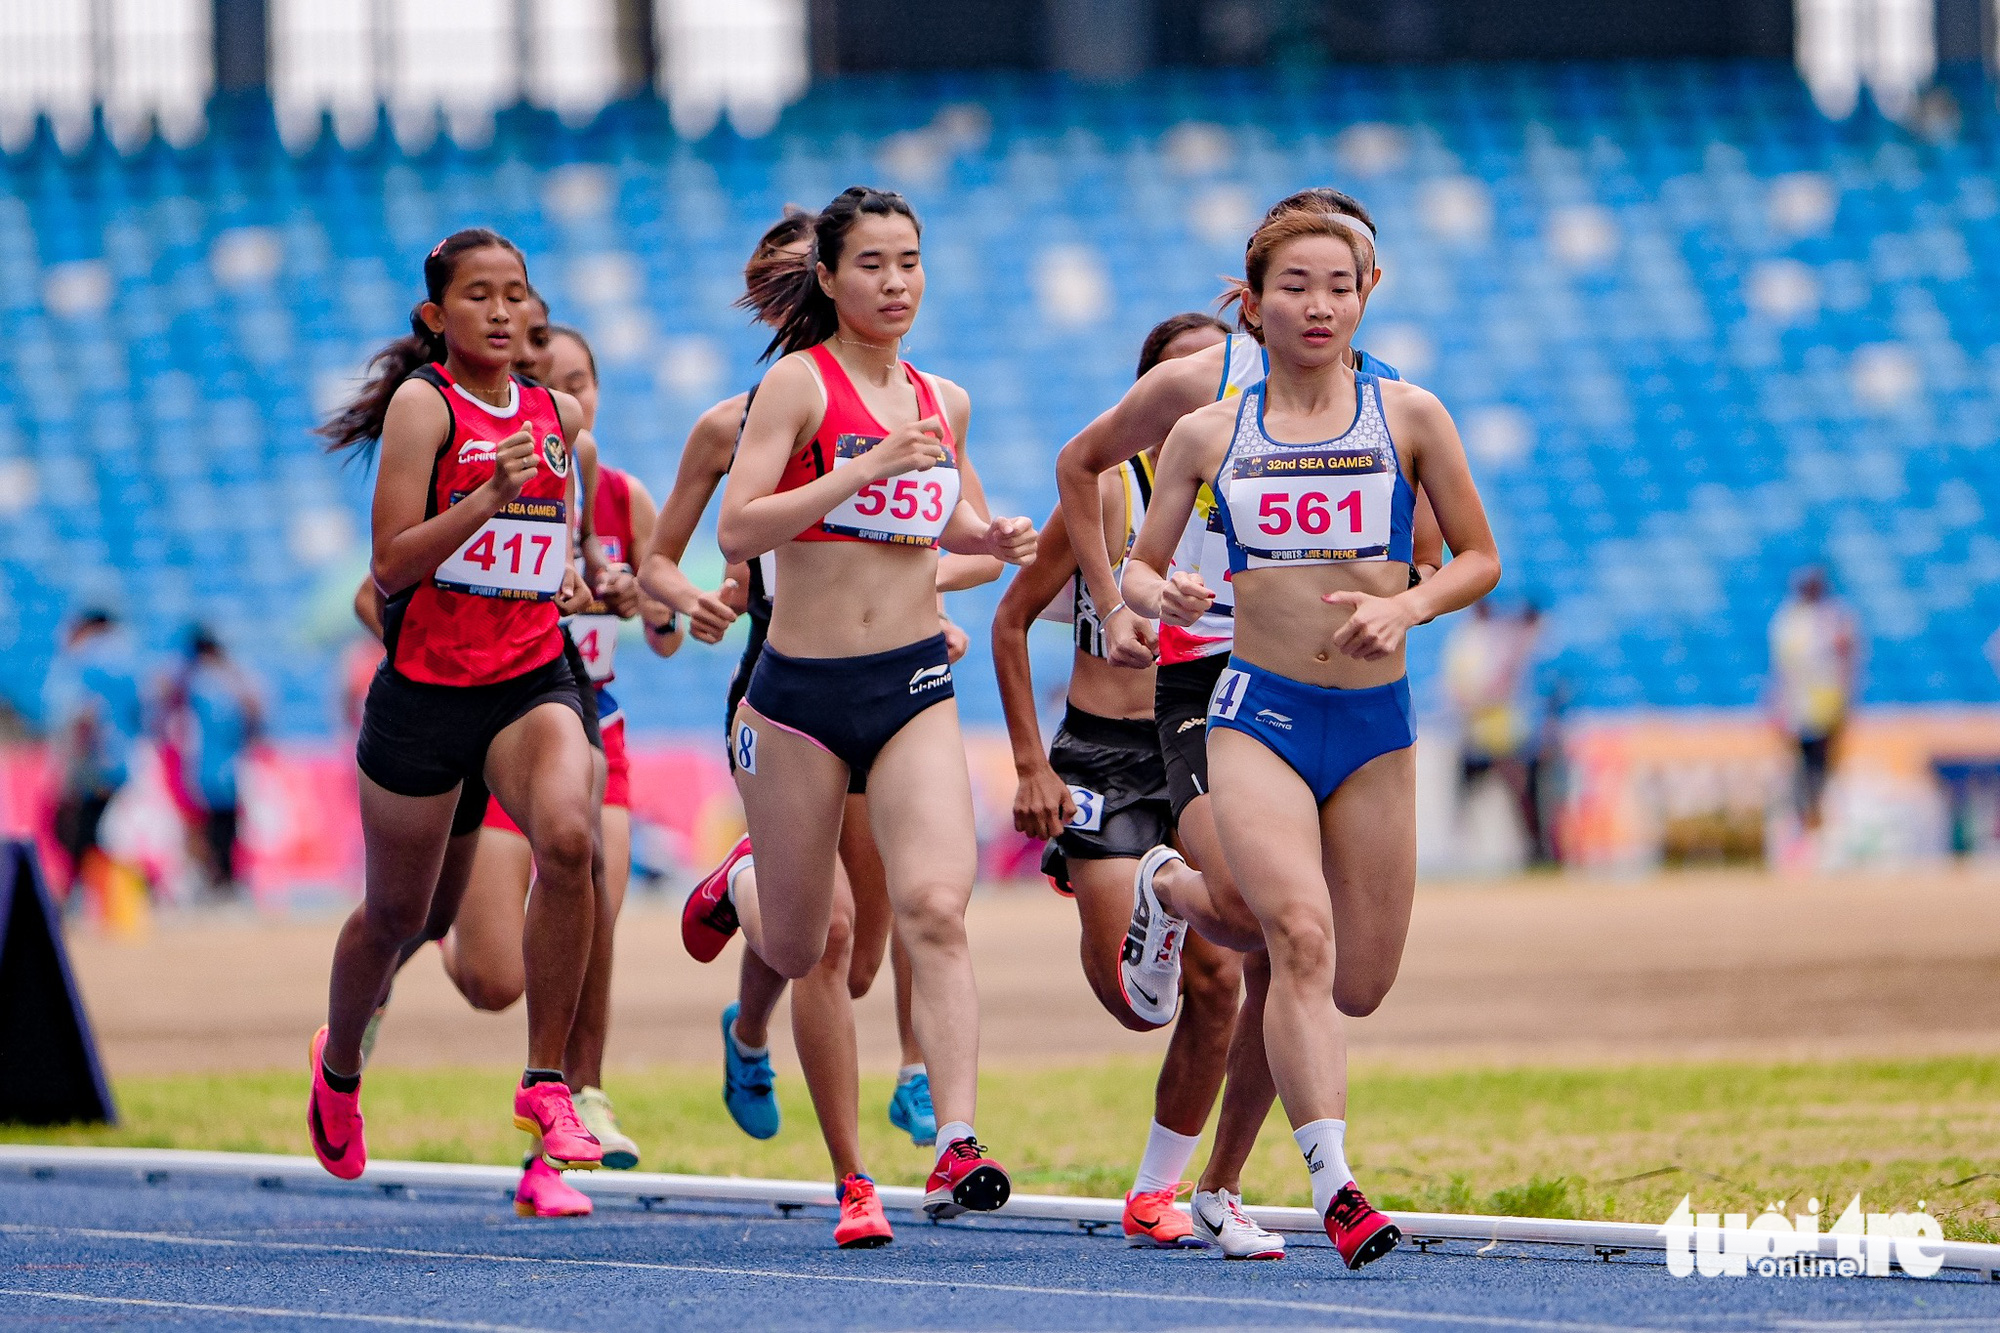 Vietnamese runner Nguyen Thi Oanh (No. 561) competes in the women's 1,500-meter run at the 2023 Southeast Asian Games in Cambodia on May 9, 2023. Photo: Nam Tran / Tuoi Tre